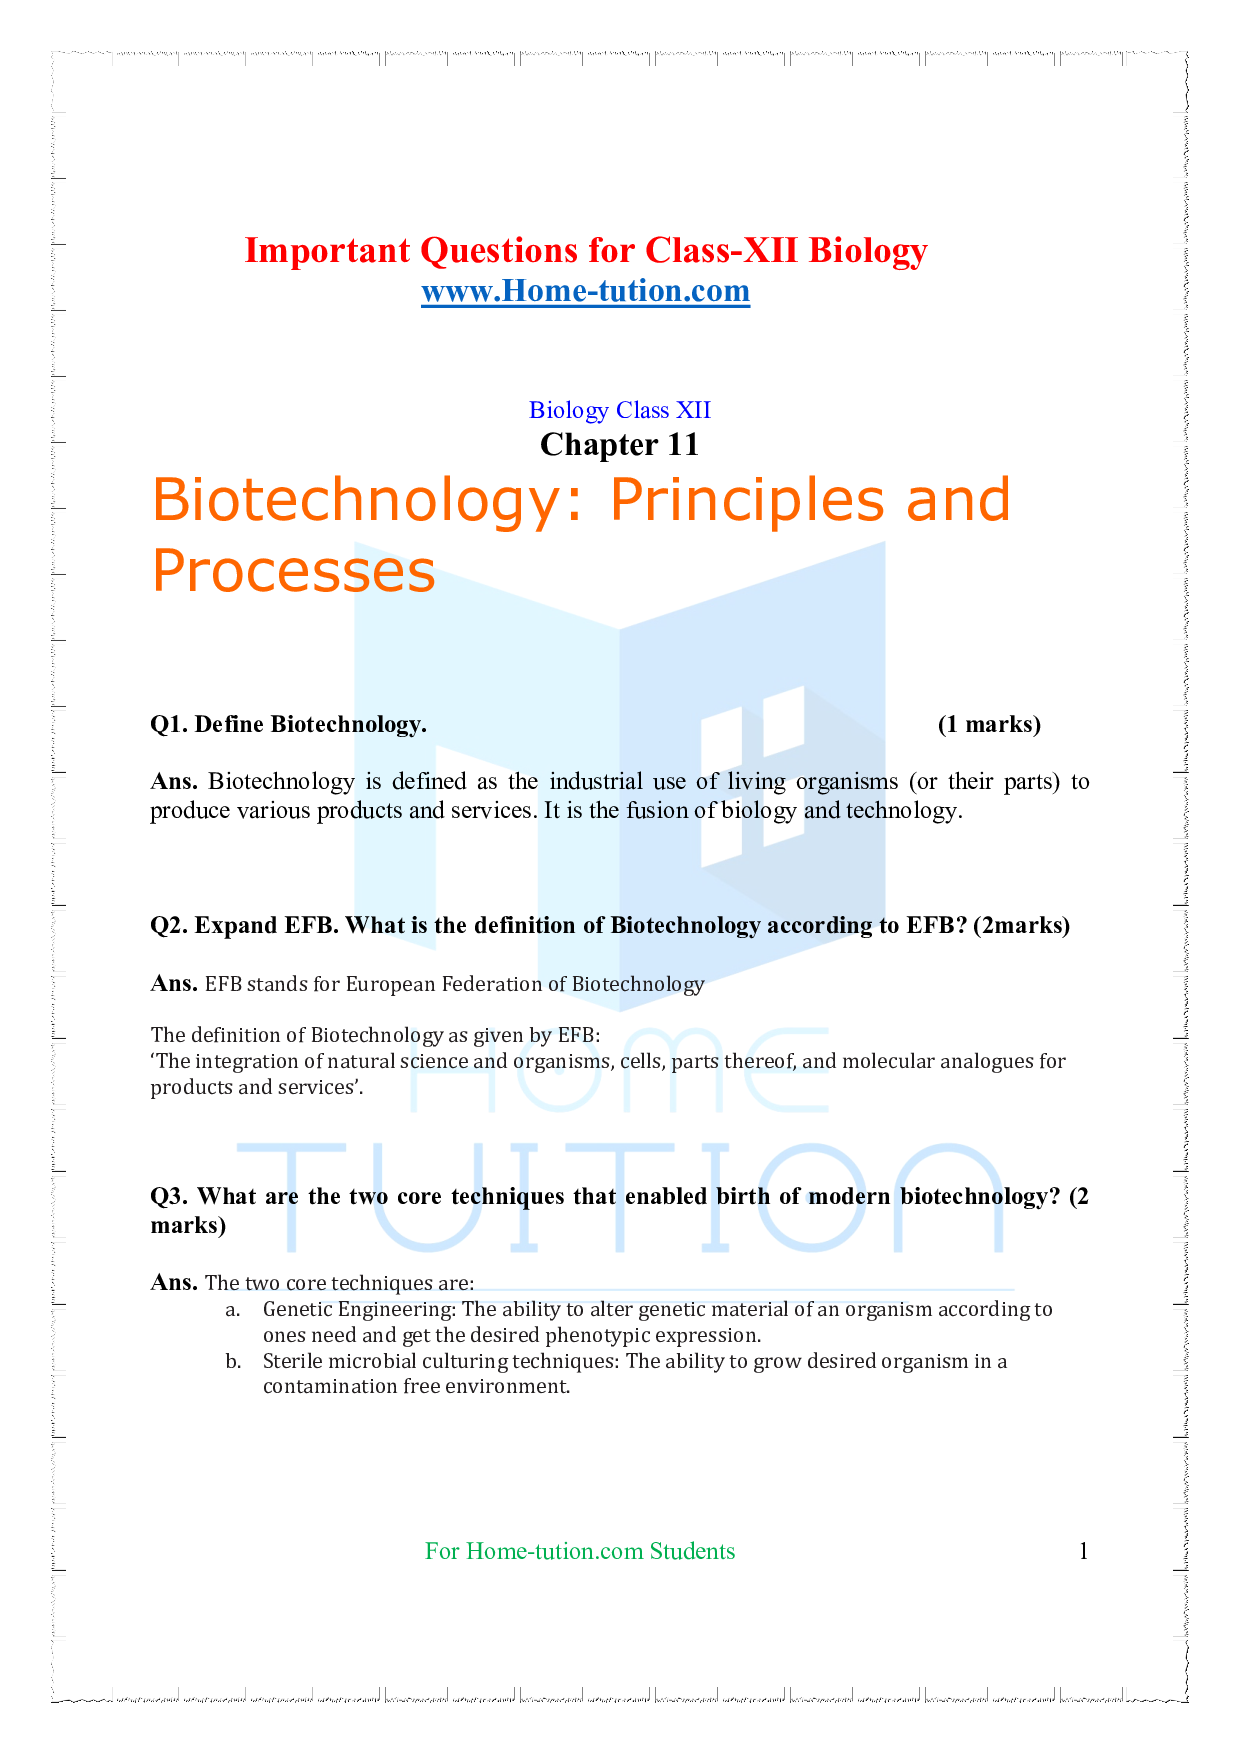 Chapter-11 Biotechnology Principles and Processes Questions